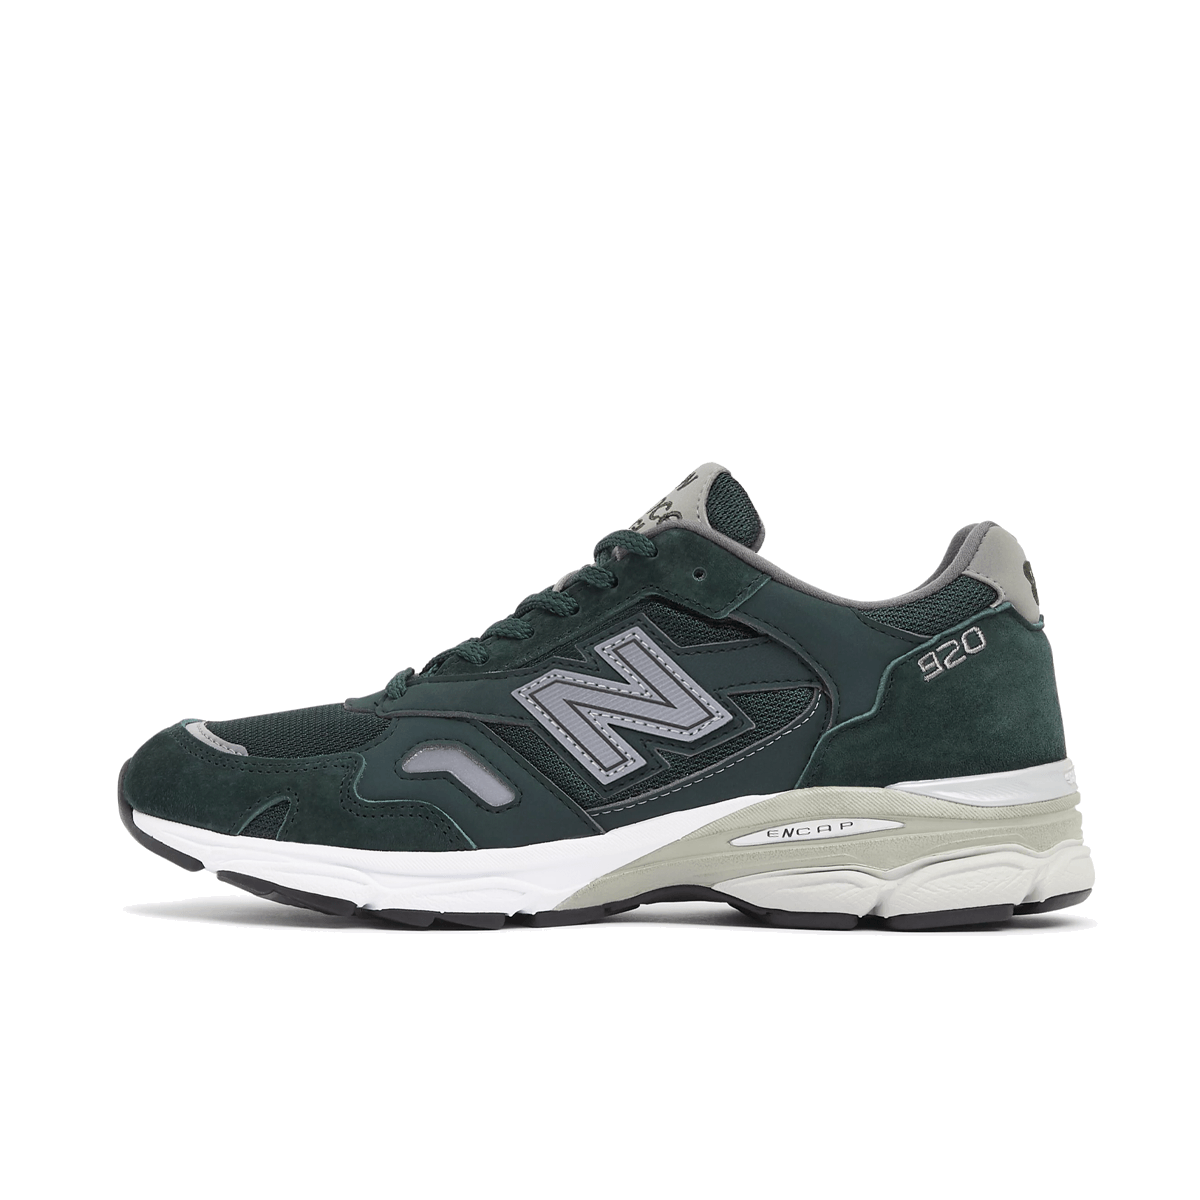 New Balance 920 Made In England 'Green' M920GRN